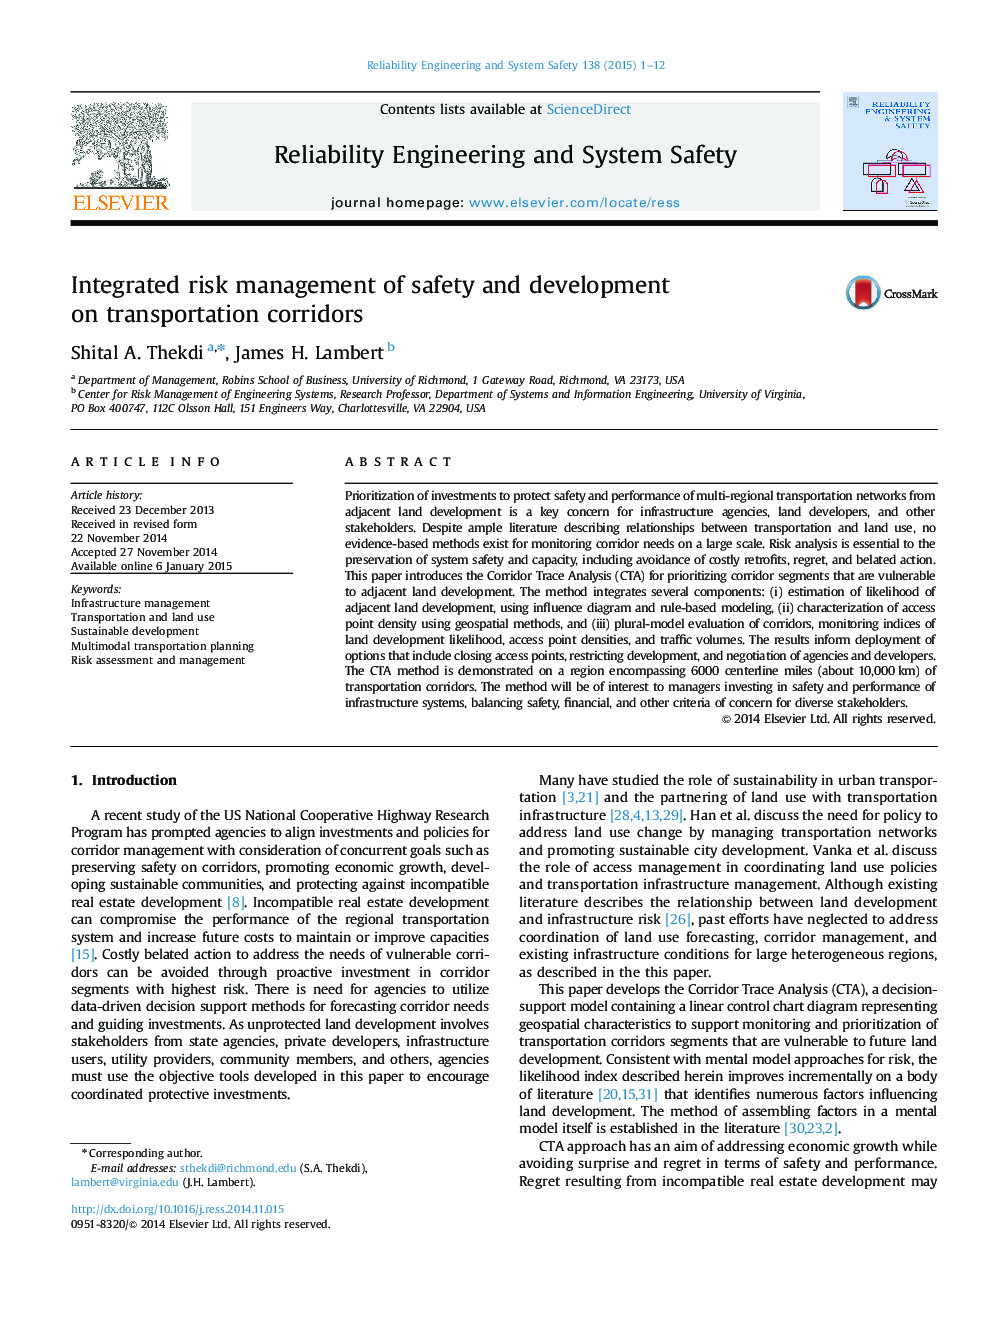 Integrated risk management of safety and development on transportation corridors